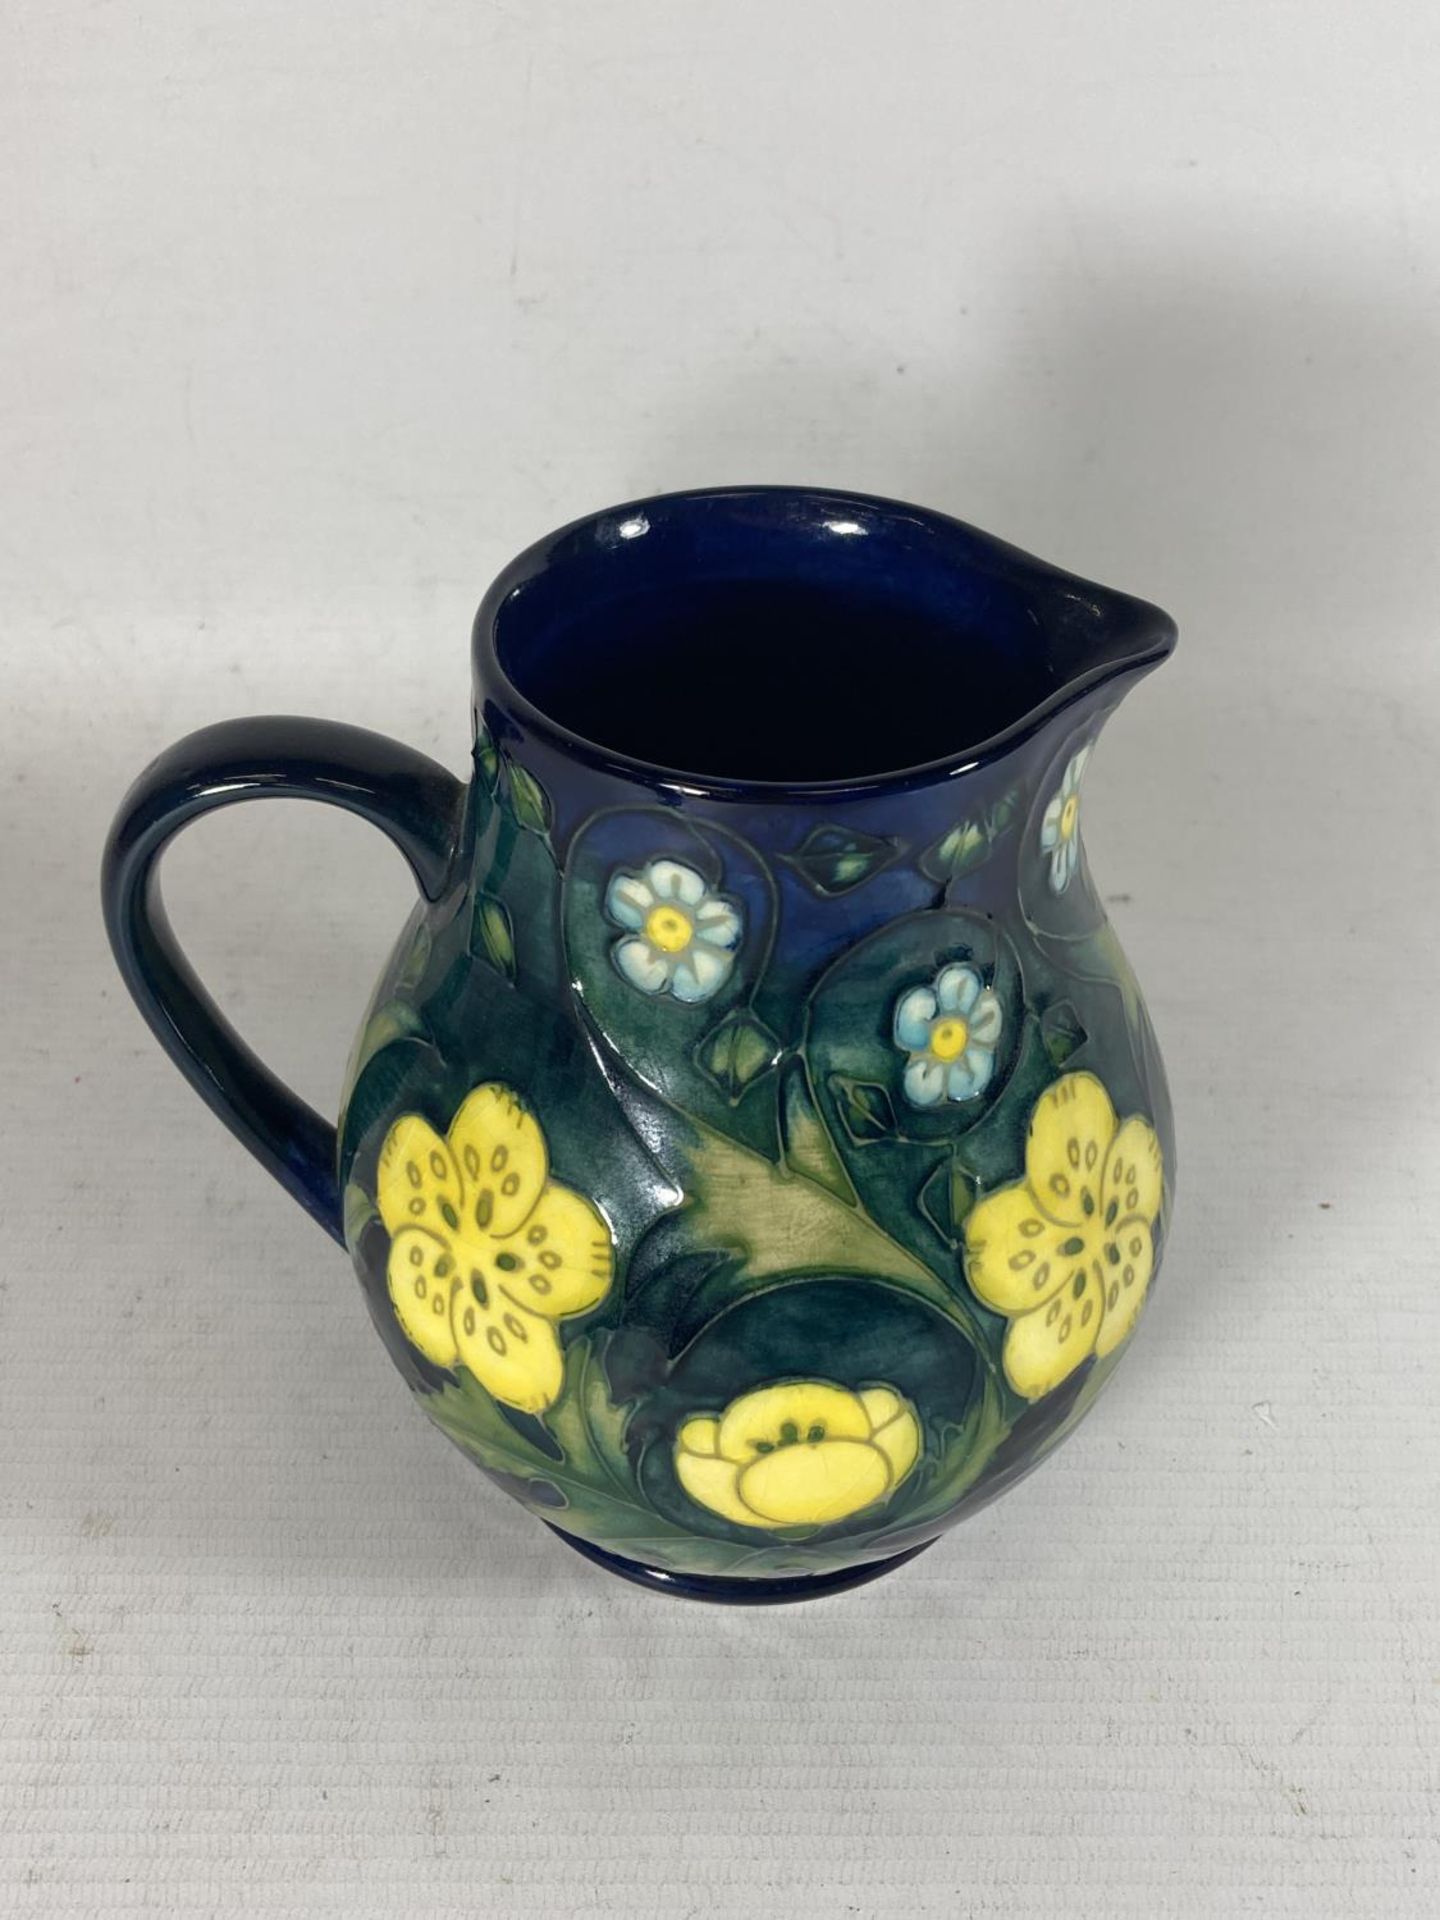 A MOORCROFT POTTERY BUTTERCUP PATTERN JUG BY SALLY TUFFIN - Image 2 of 3